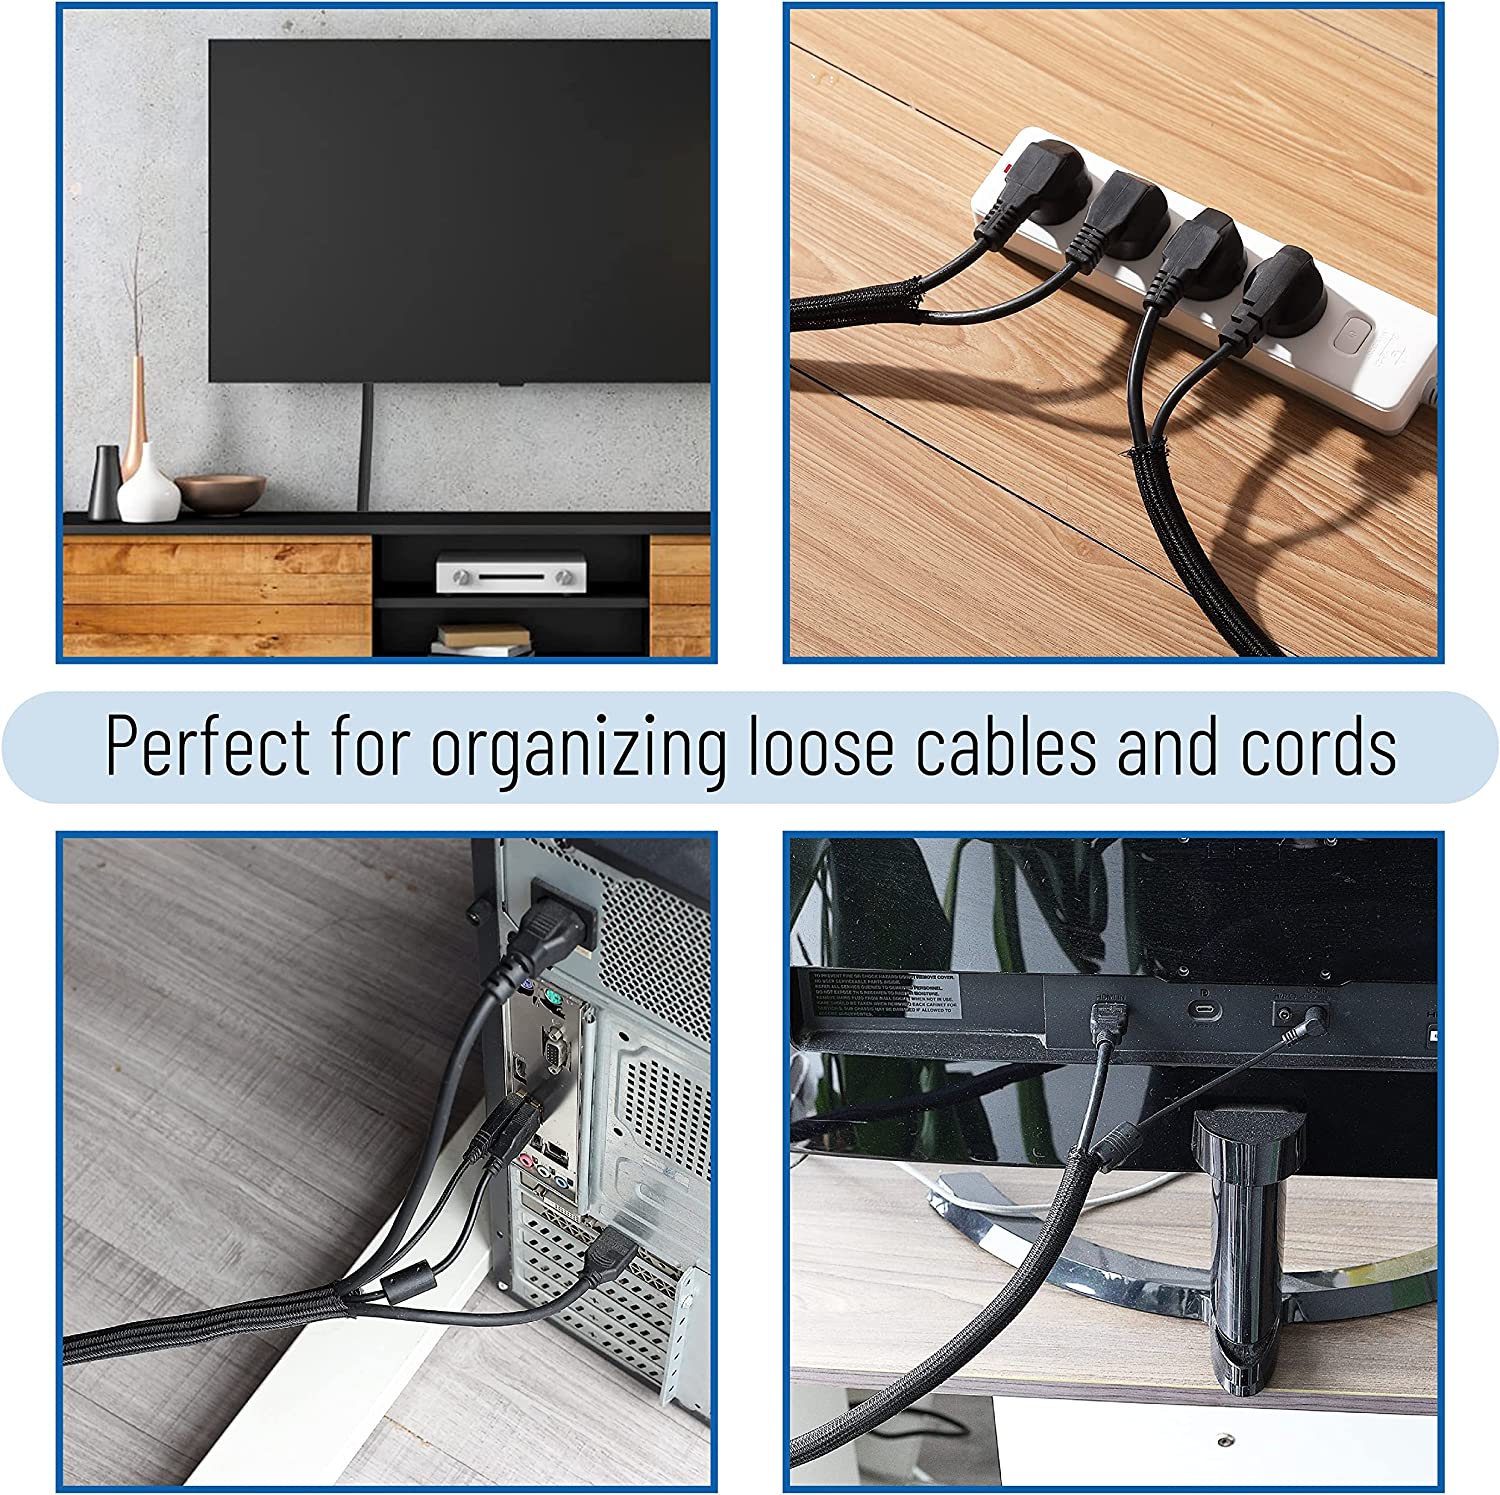 Cable Sleeving, Braided Sleeve & Wire Loom Cable Management 